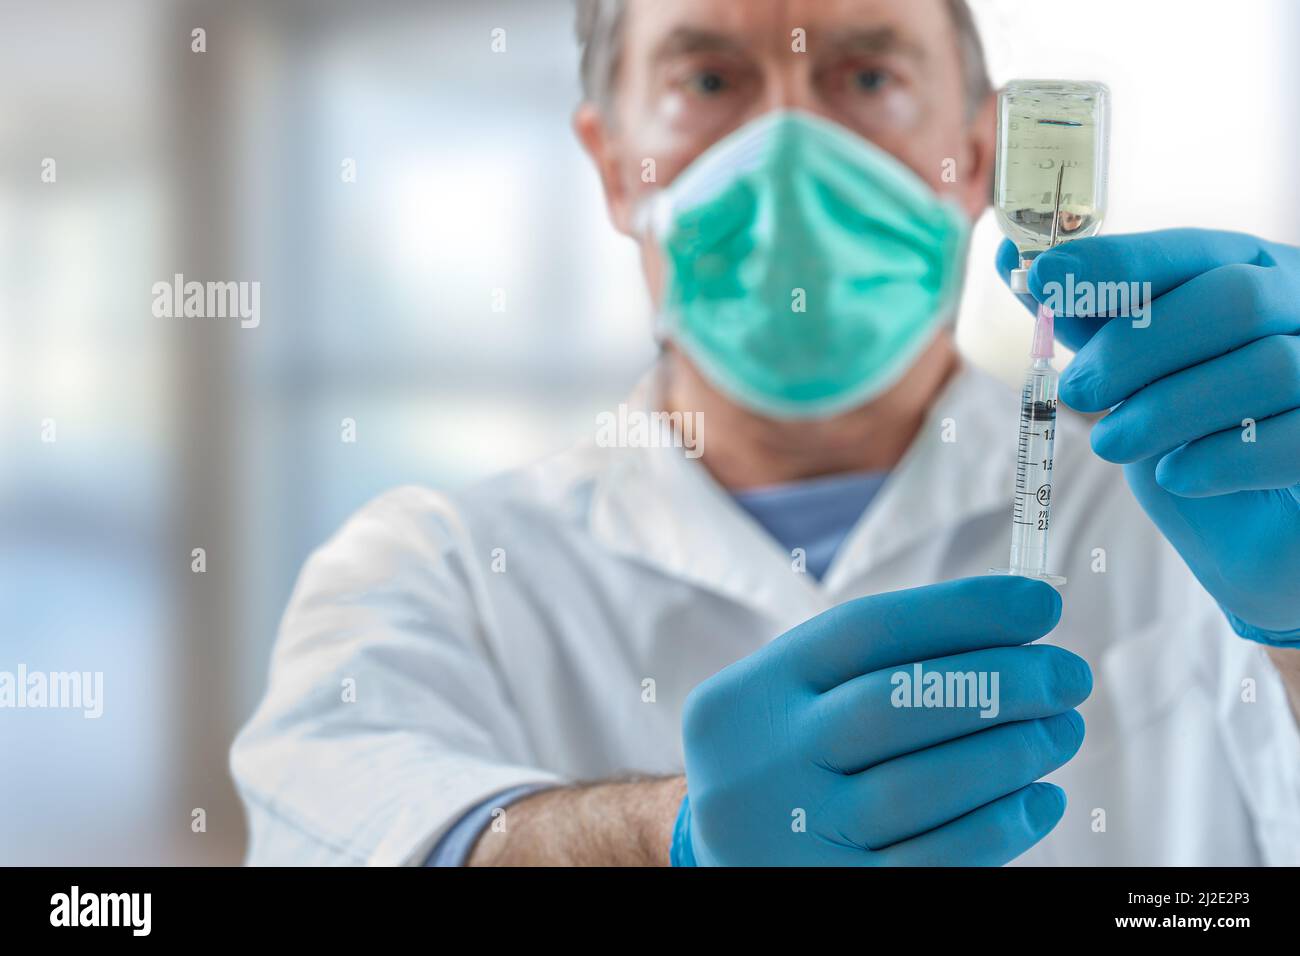 The doctor fills a syringe with vaccine on blurred background. Stock Photo